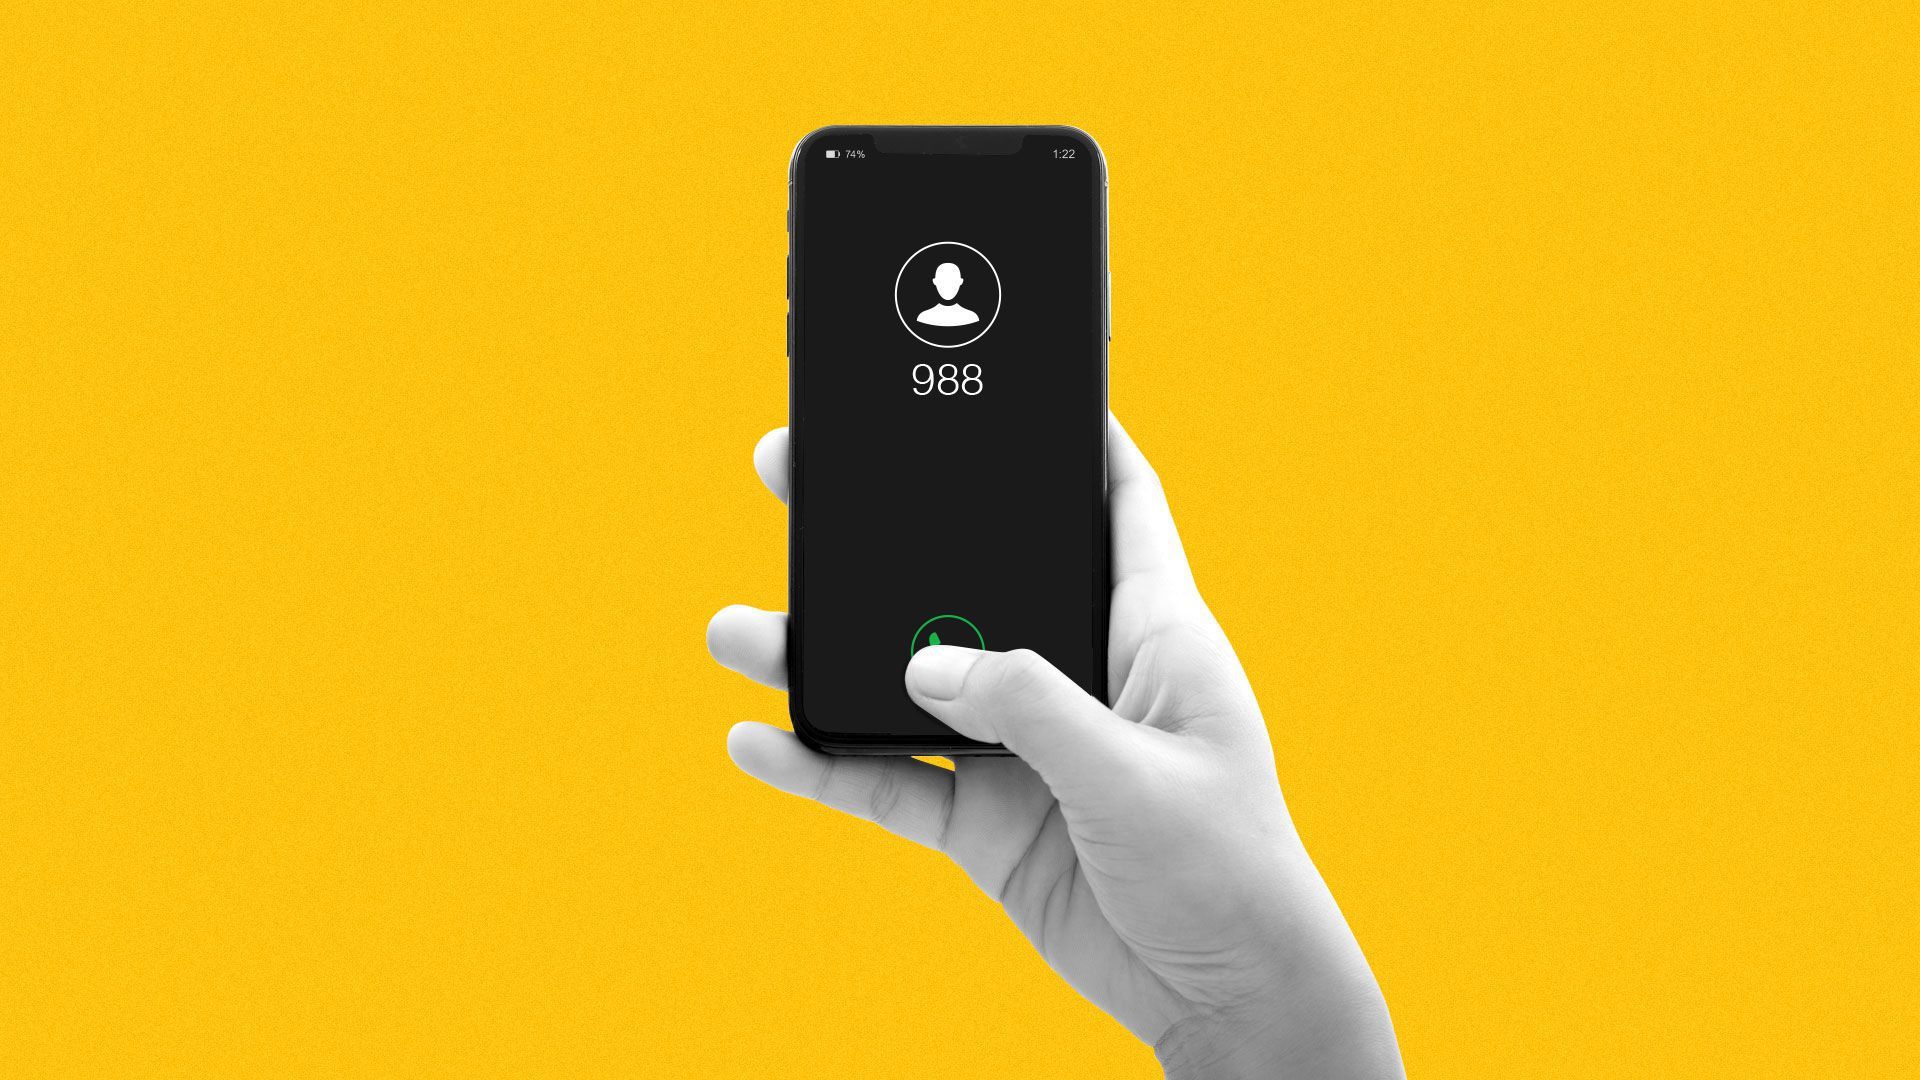 An illustration of a cell phone with the "988" suicide hotline displayed